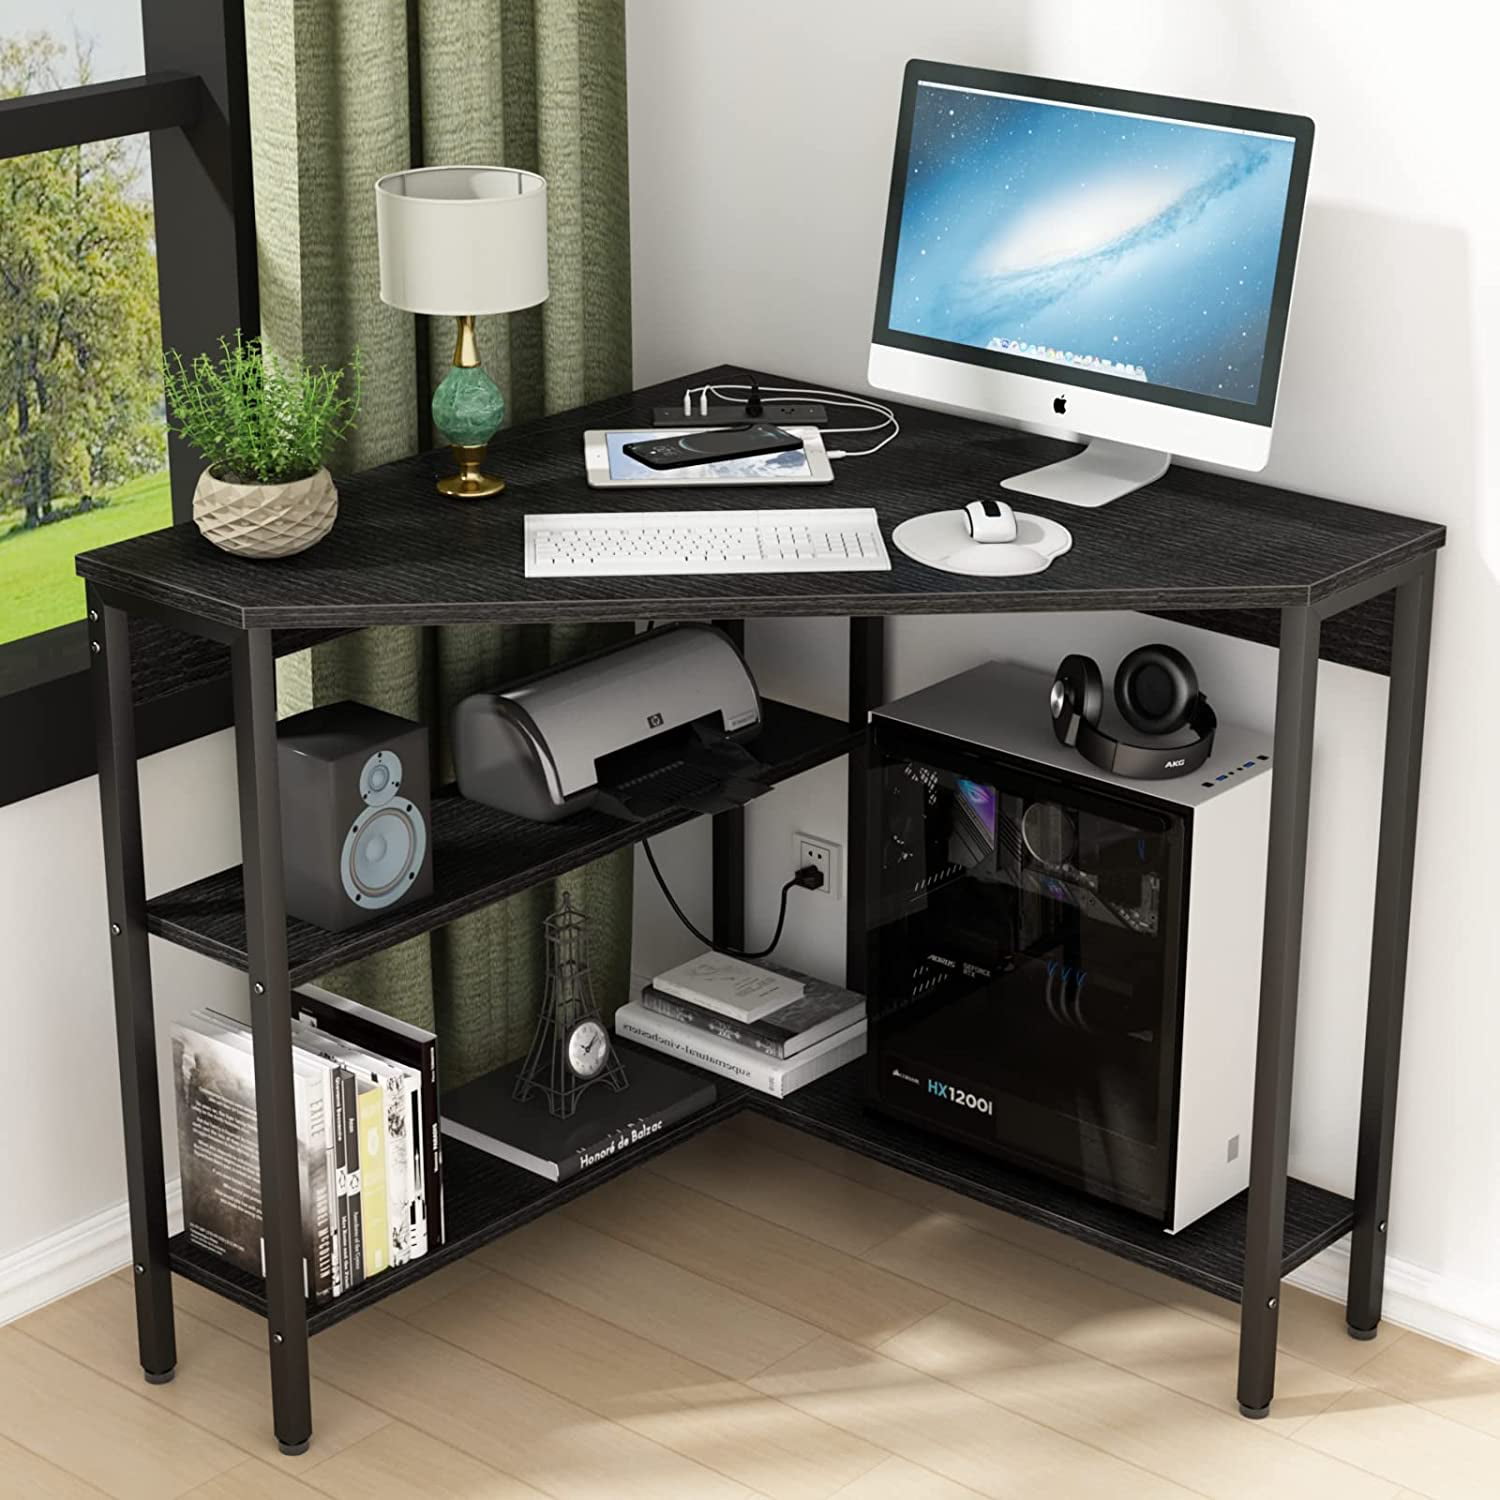 armocity Corner Desk Small Desk with Outlets Corner Table for Small Space,  Corner Computer Desk with USB Ports Triangle Desk with Storage for Home  Office, Workstation, Living Room, Bedroom, Oak 